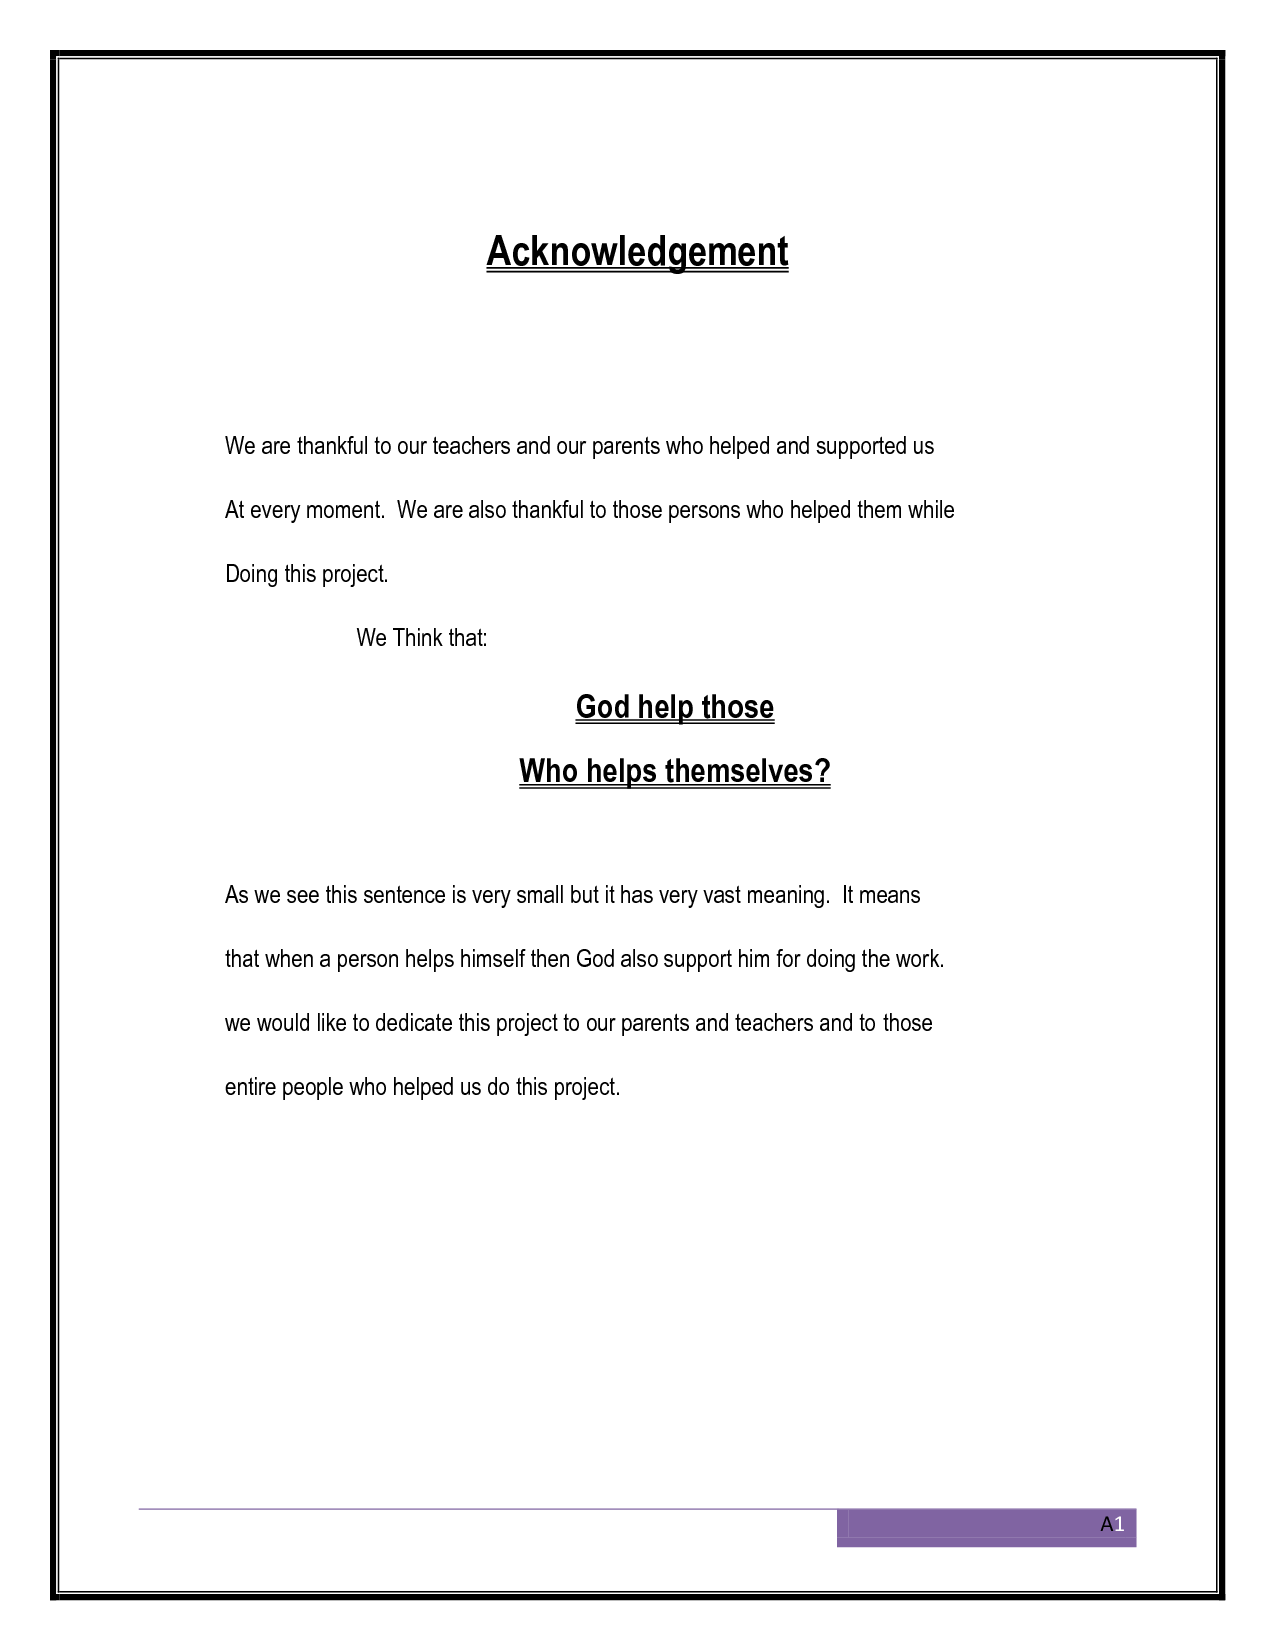 Dissertation how to write acknowledgements